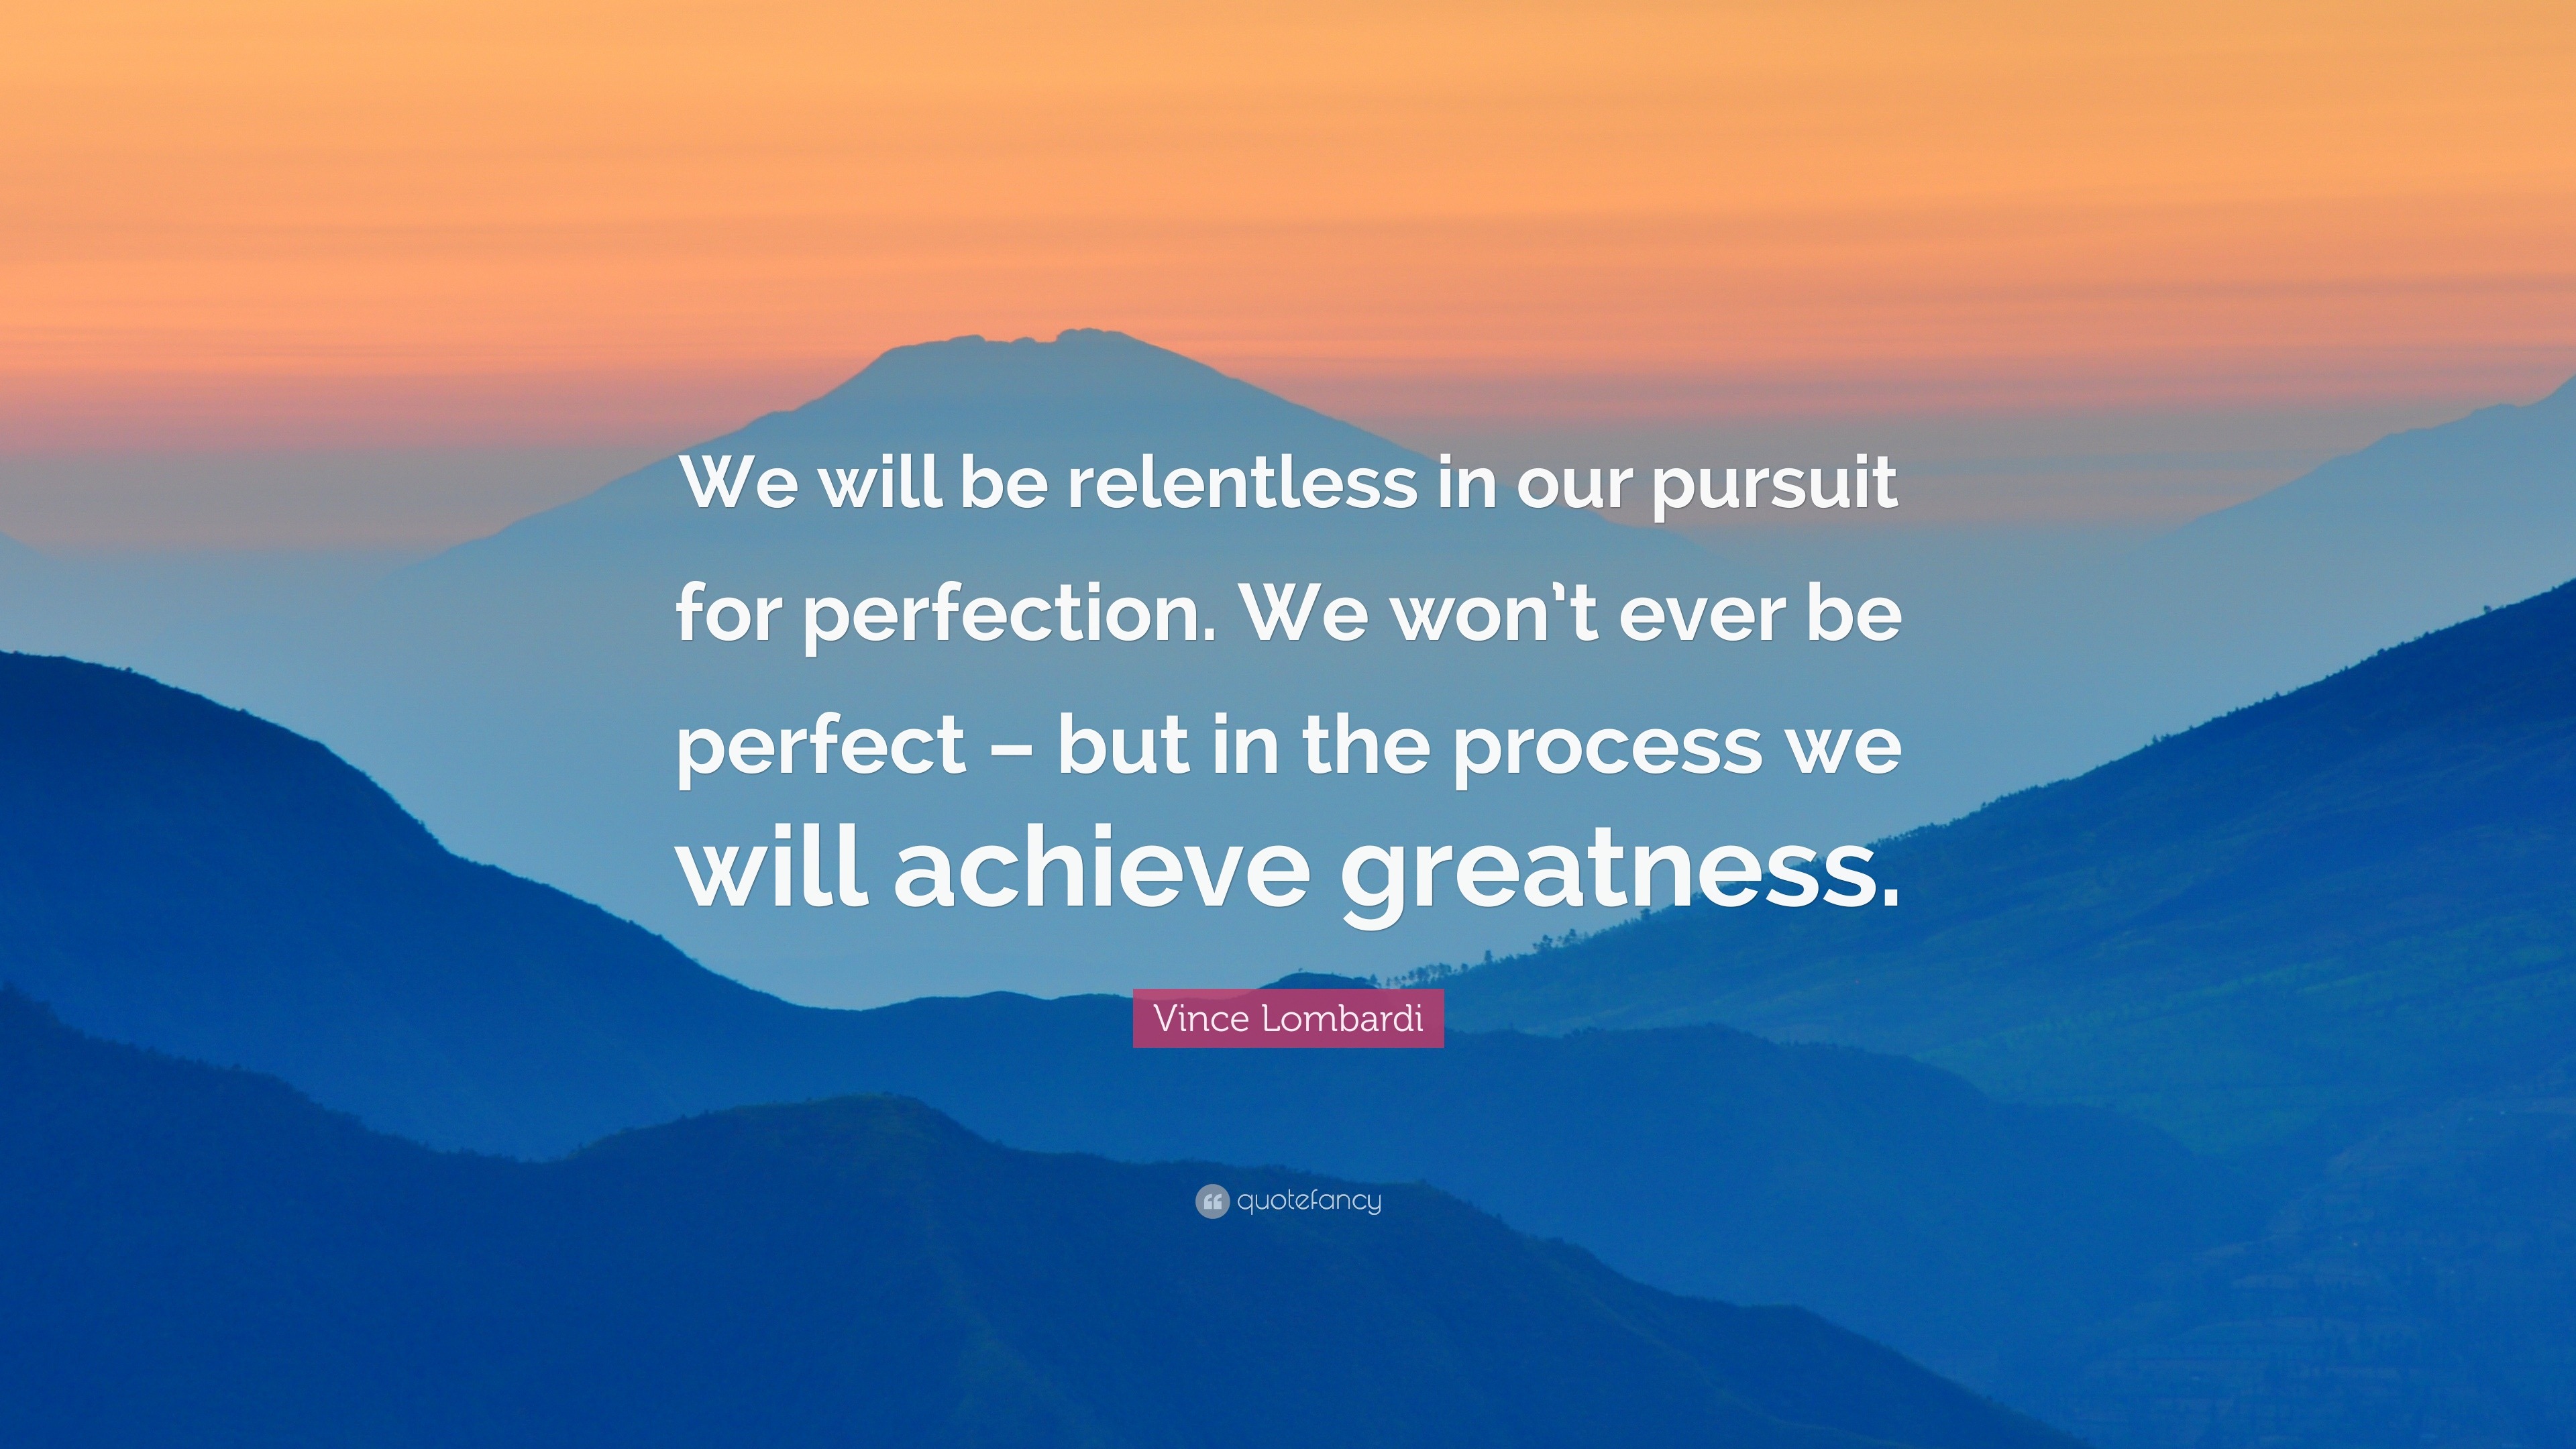 149430 Vince Lombardi Quote We will be relentless in our pursuit for